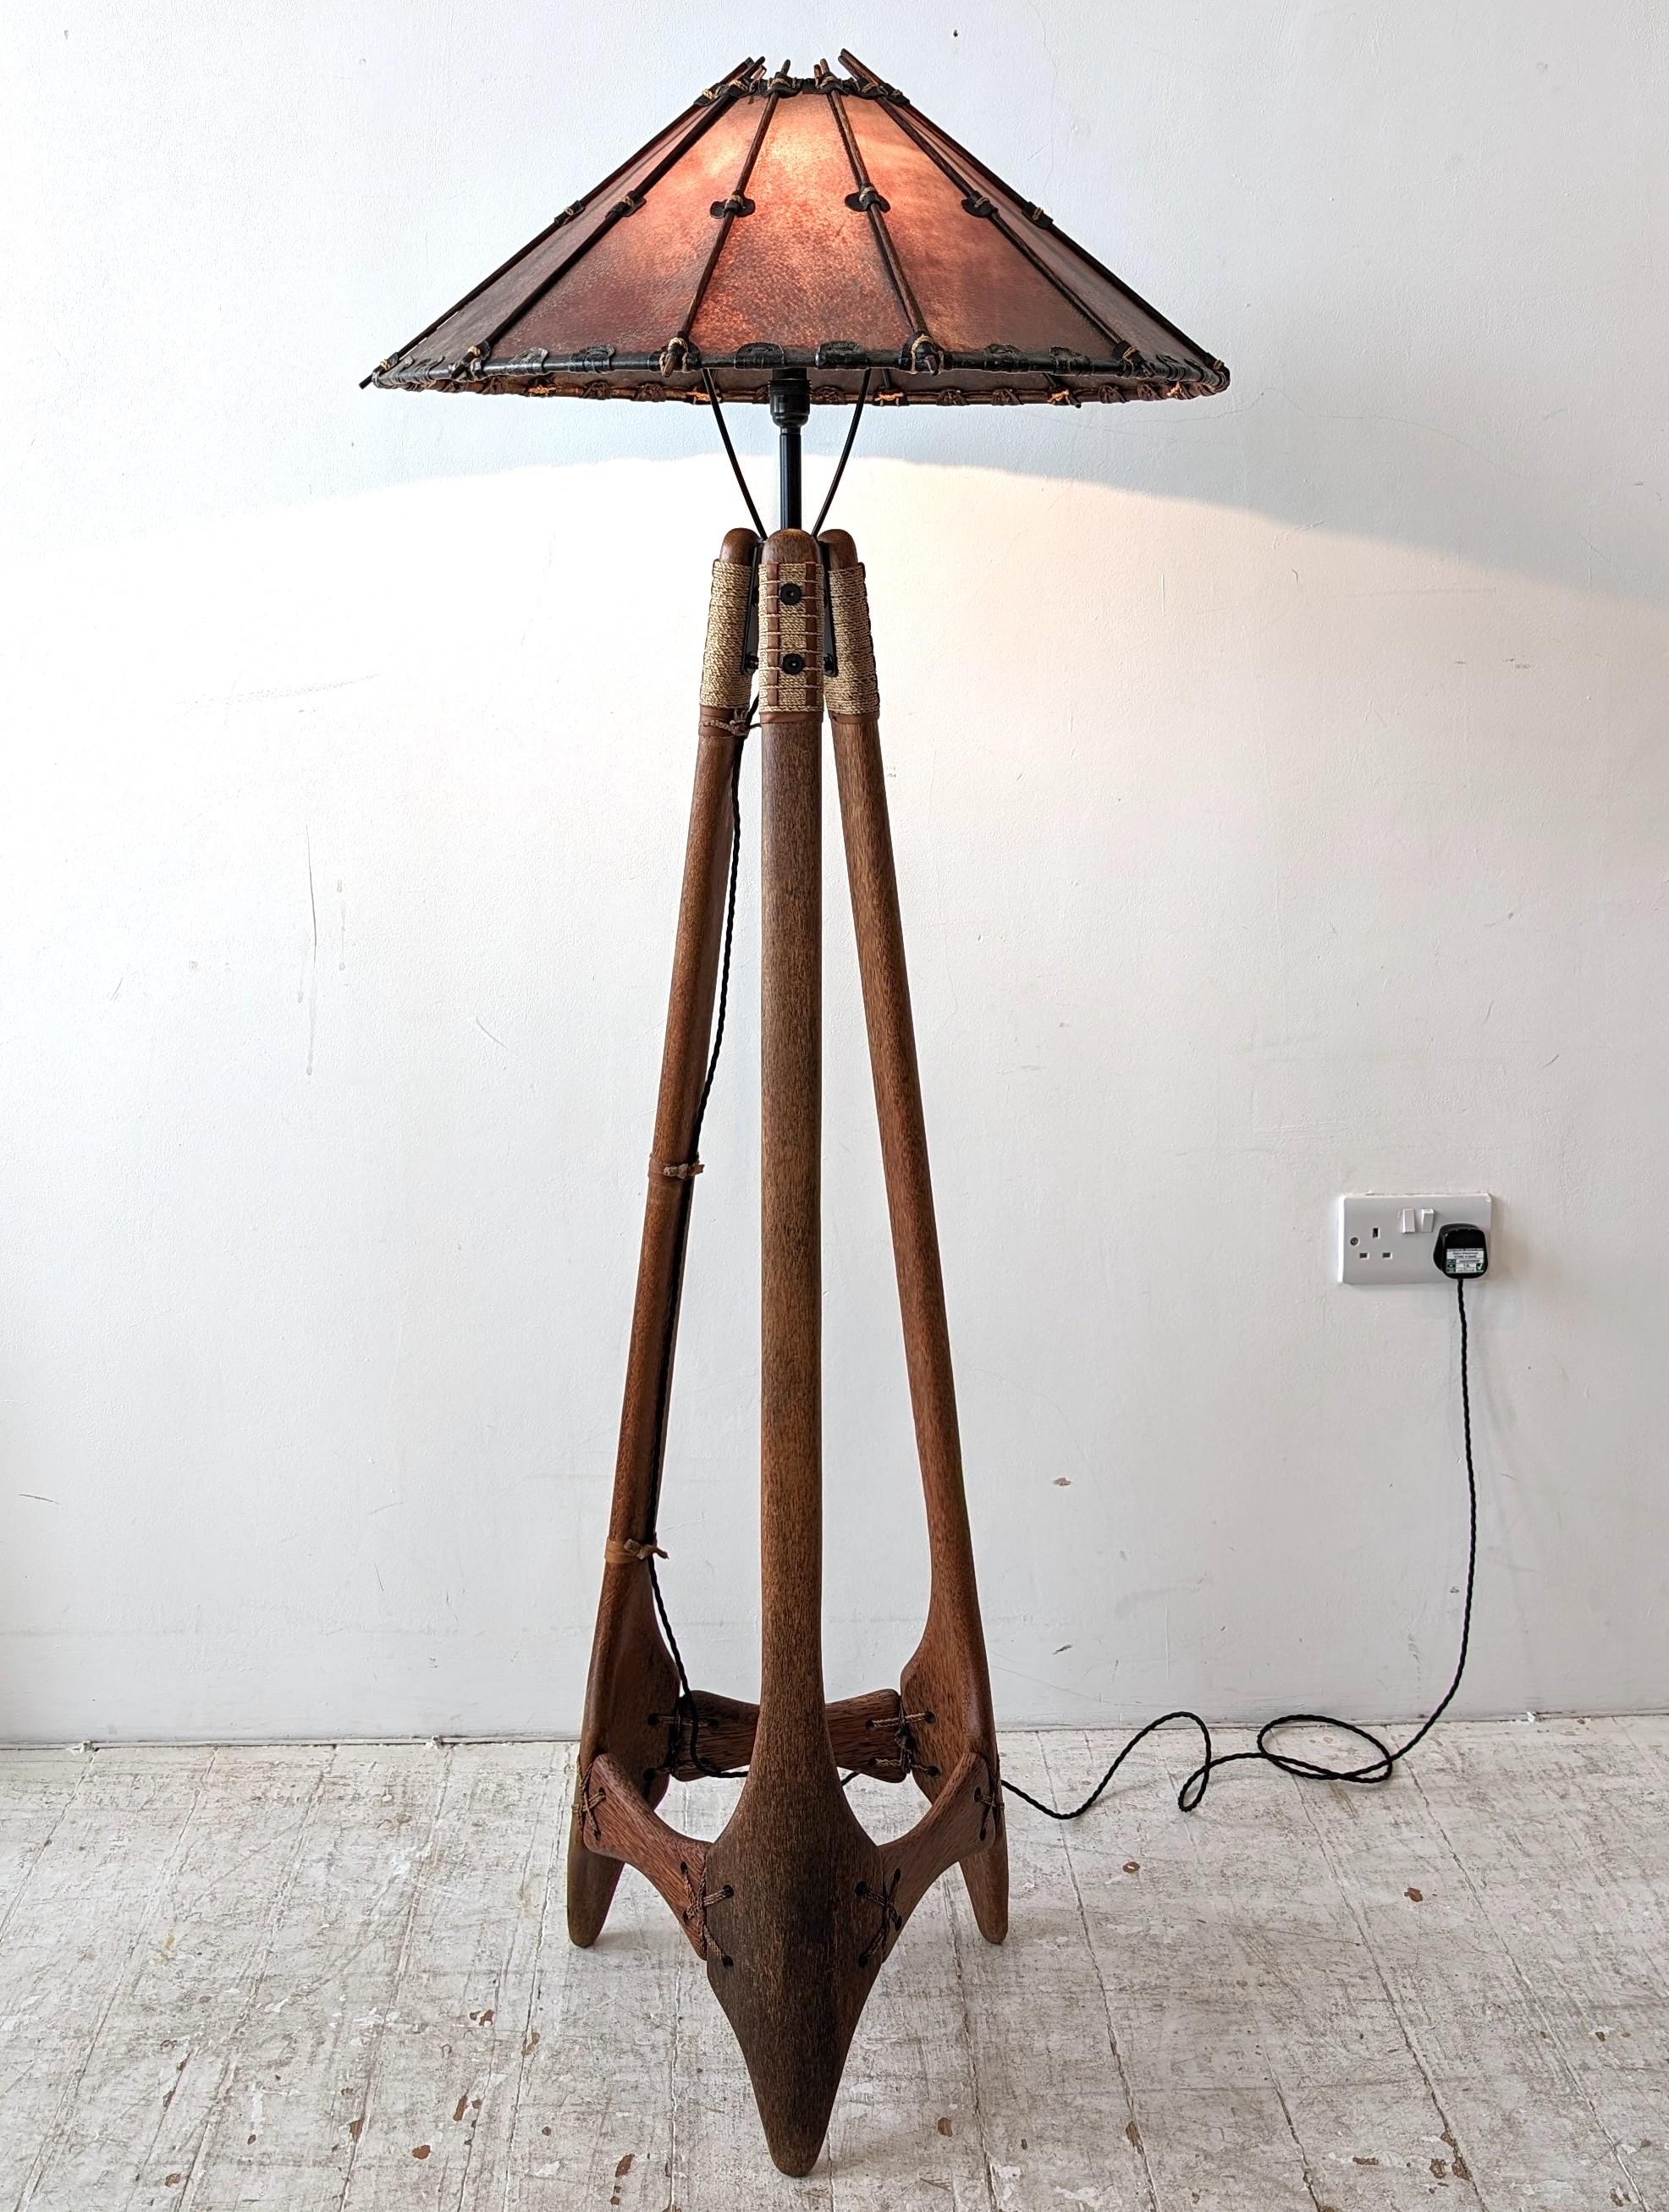 Palmwood, leather and sisal floor lamp, manufactured in Fiji by Pacific Green, c1990s. Waxed leather shade, with sisal and leather details, and black steel fixings.
Newly rewired with braided cord.

Dimensions: height 151cm, diameter of shade 61cm,